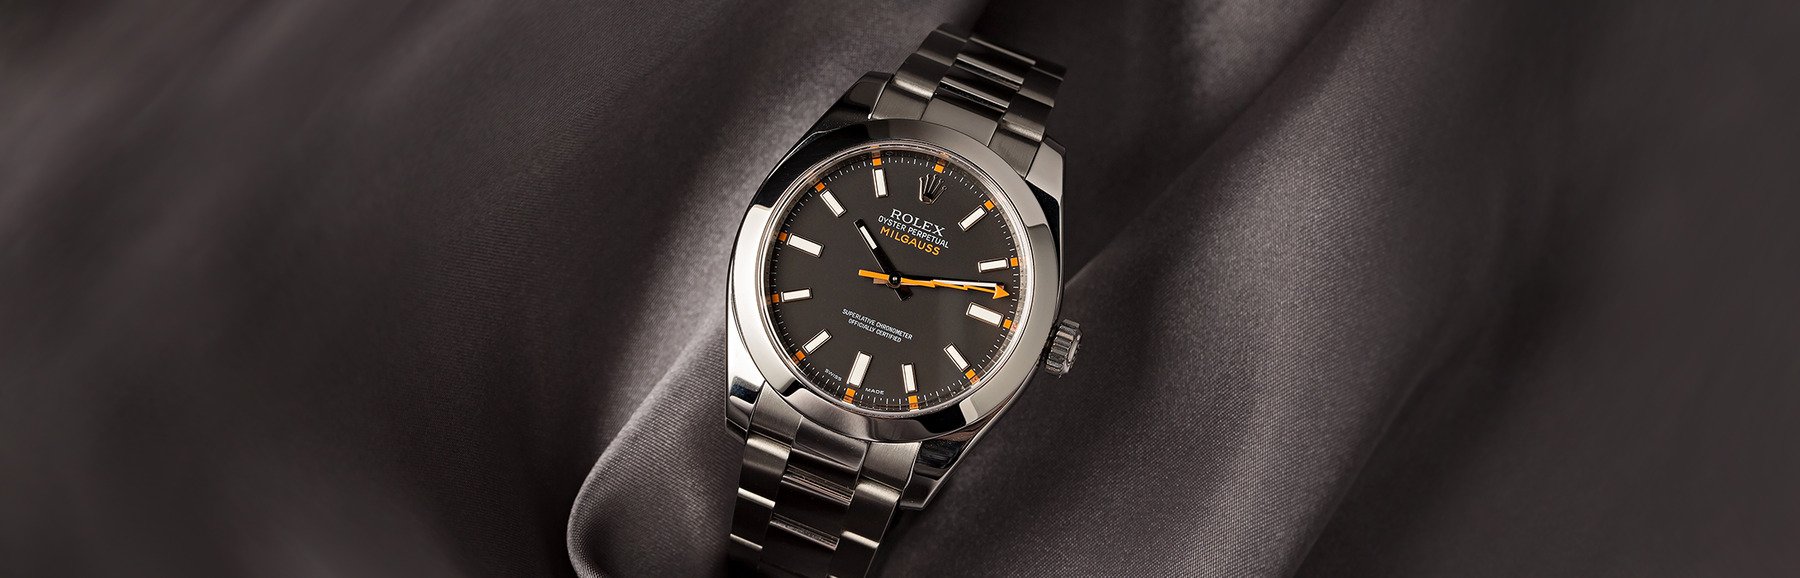 Reasons to Choose the Rolex Milgauss for Your Watch Collection